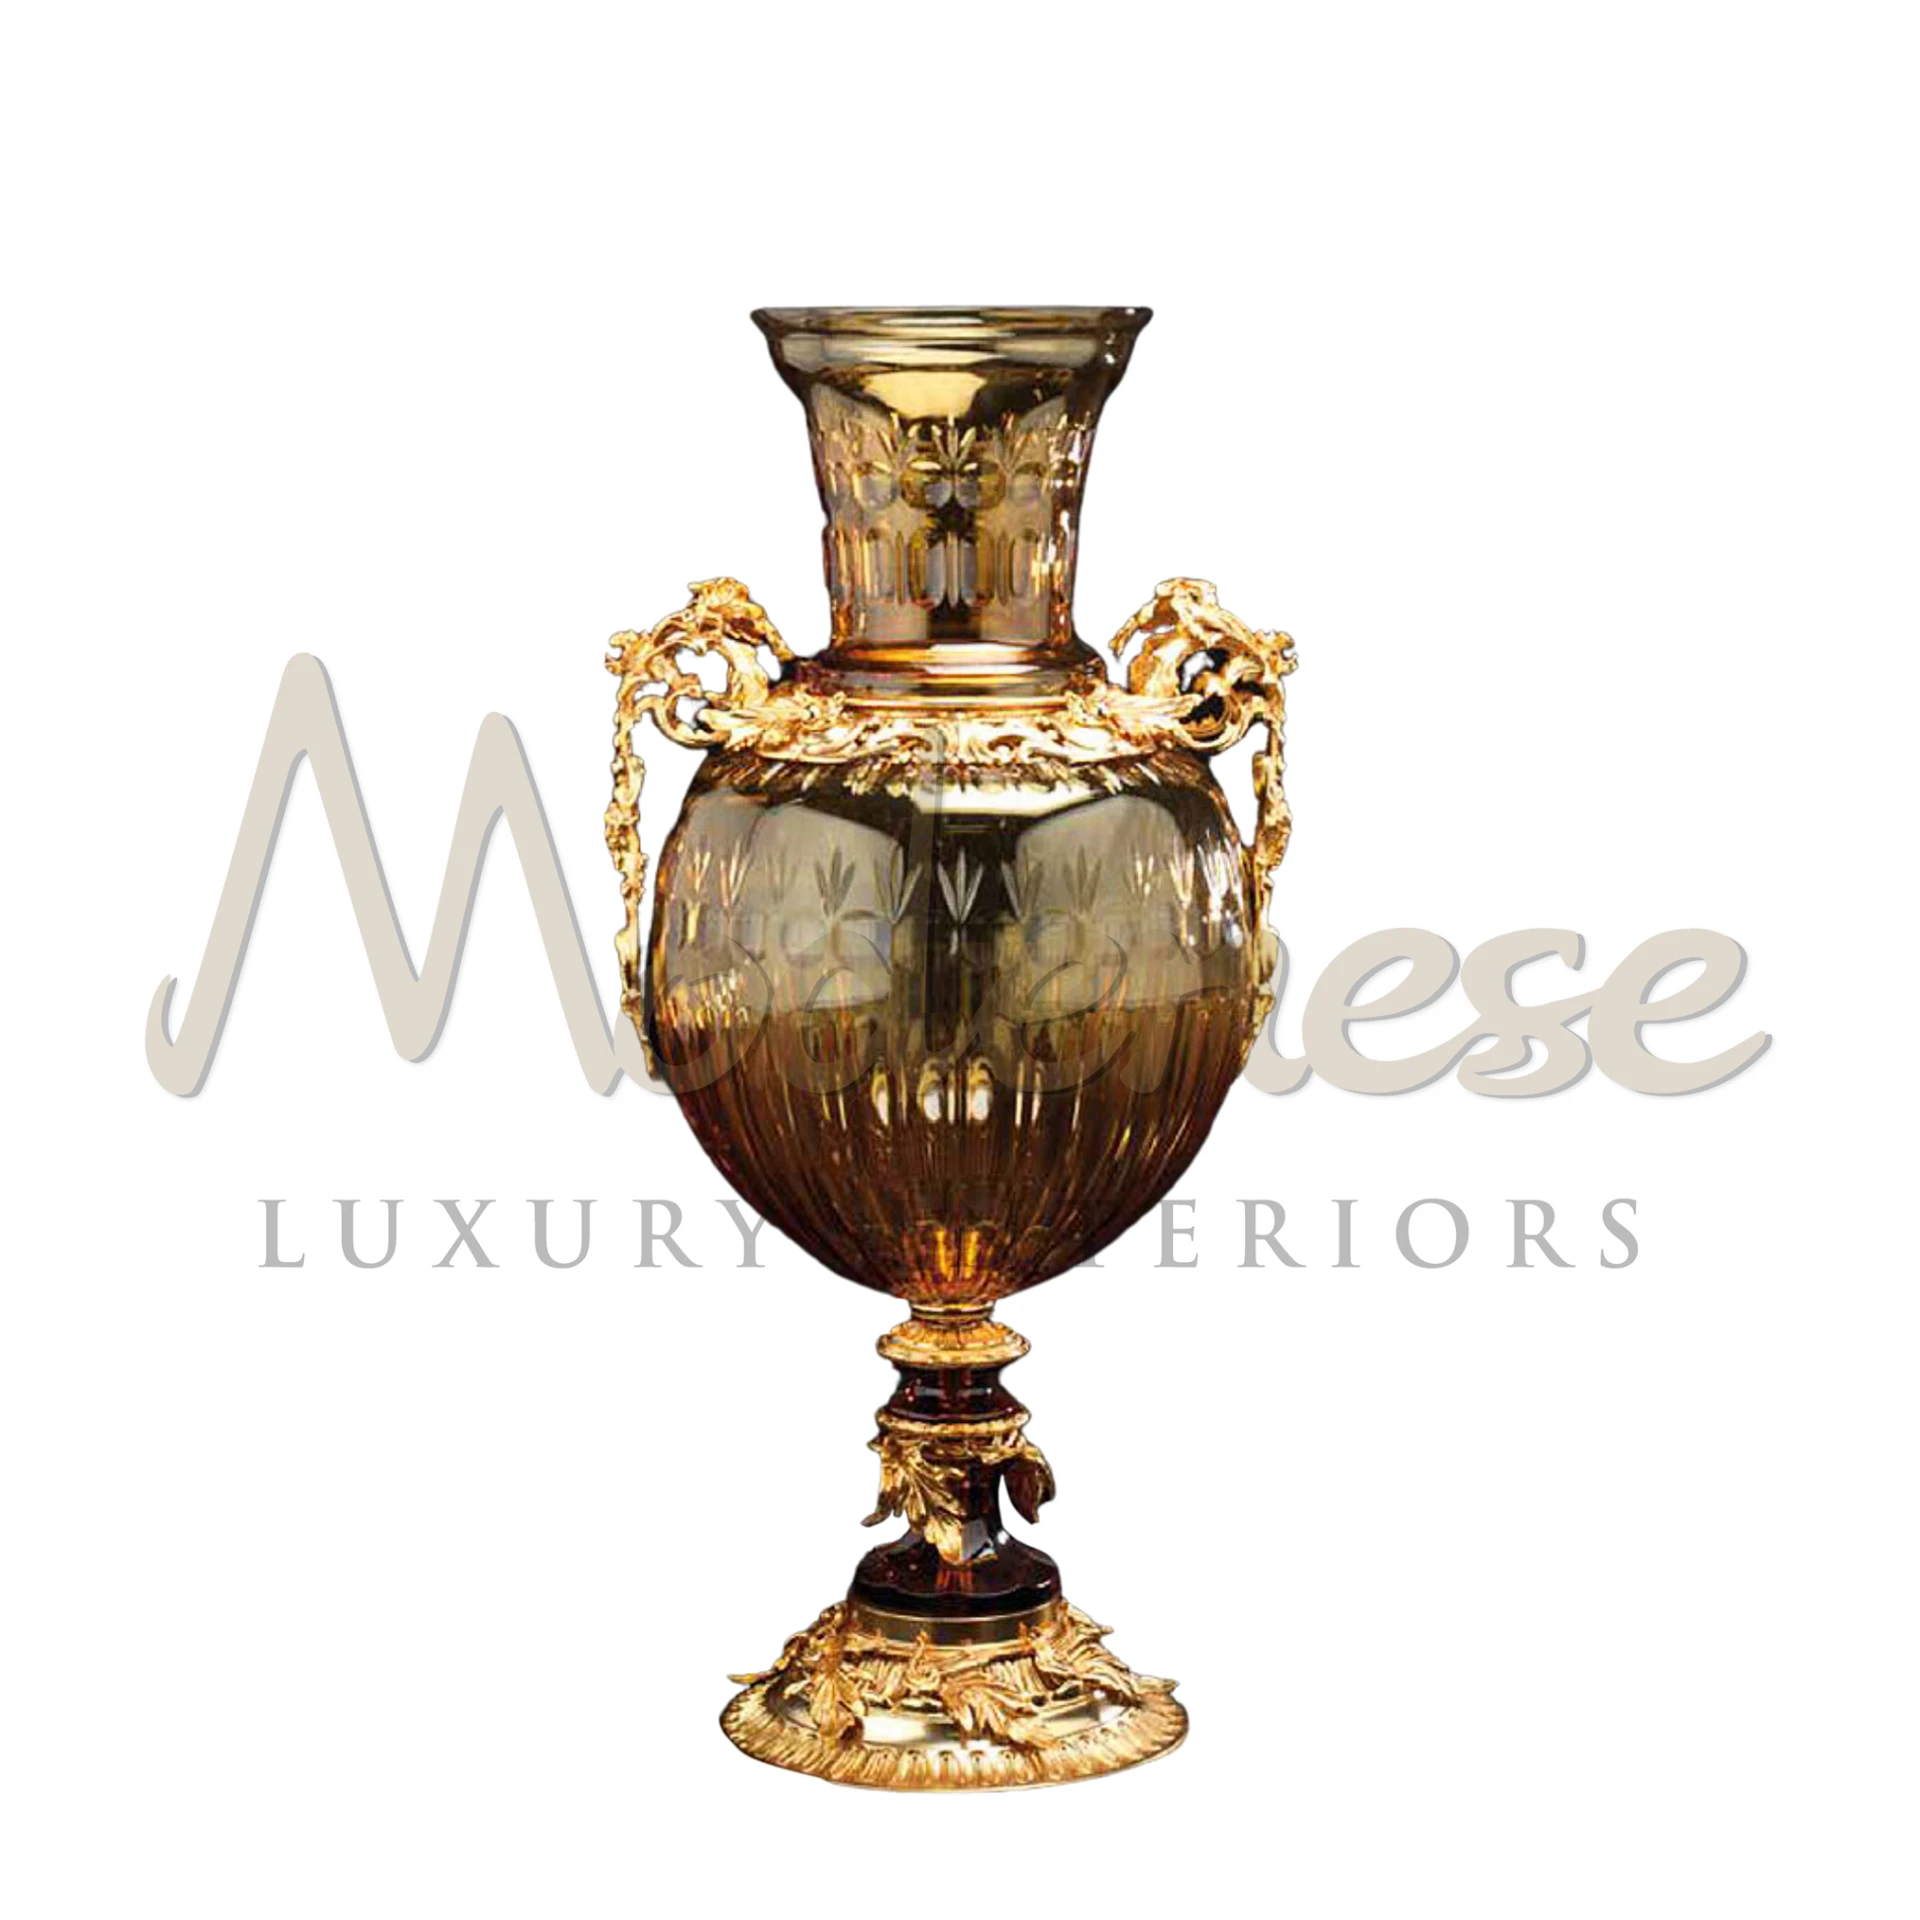 Modenese Traditional Stylish Glass Vase, crafted with attention to detail in crystal or Murano glass, perfect for luxurious interior design.






